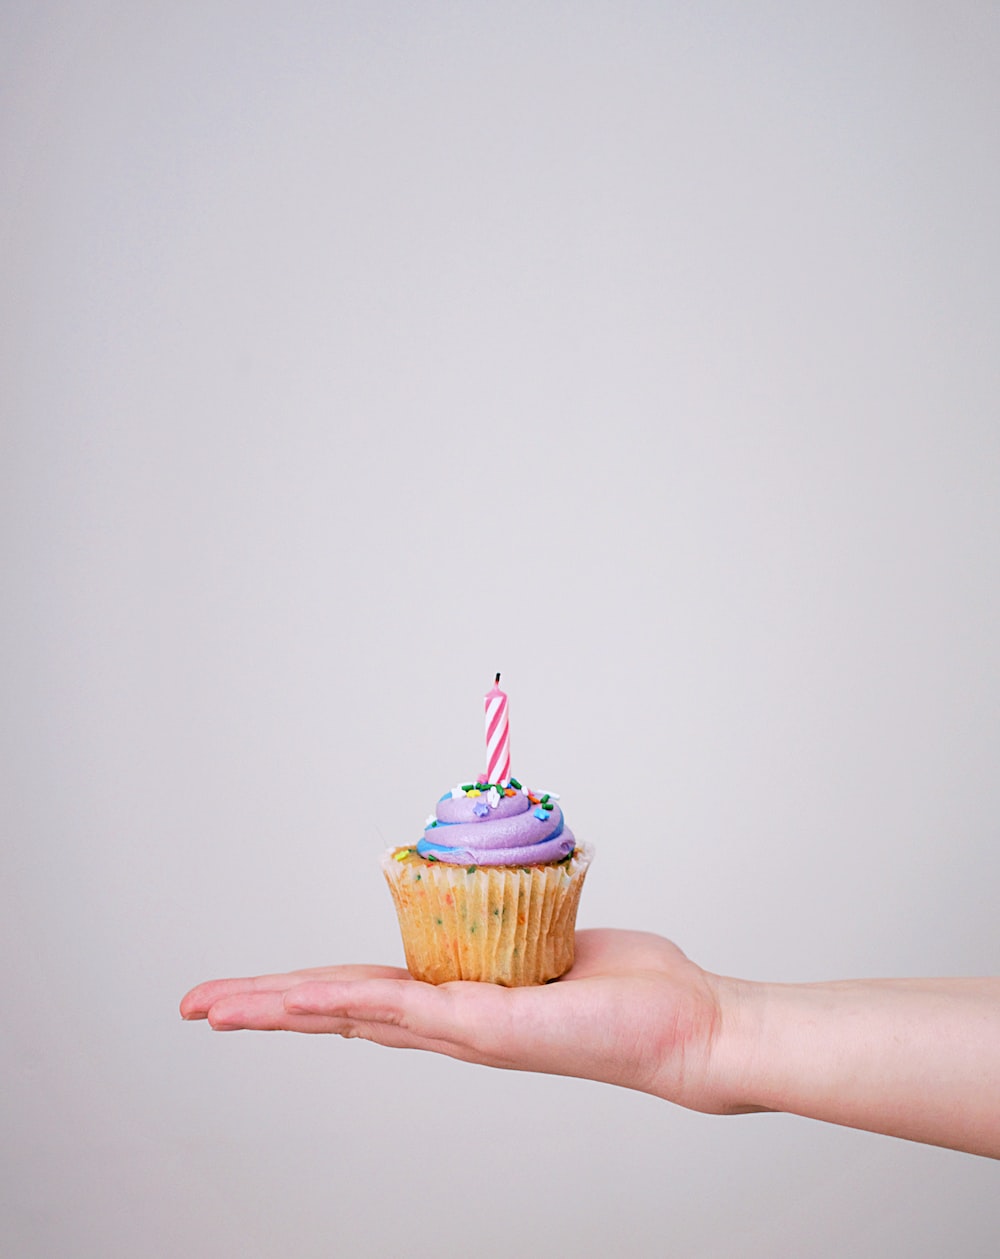 A person holding a cupcake with a candle on it. - Birthday, bakery, cupcakes